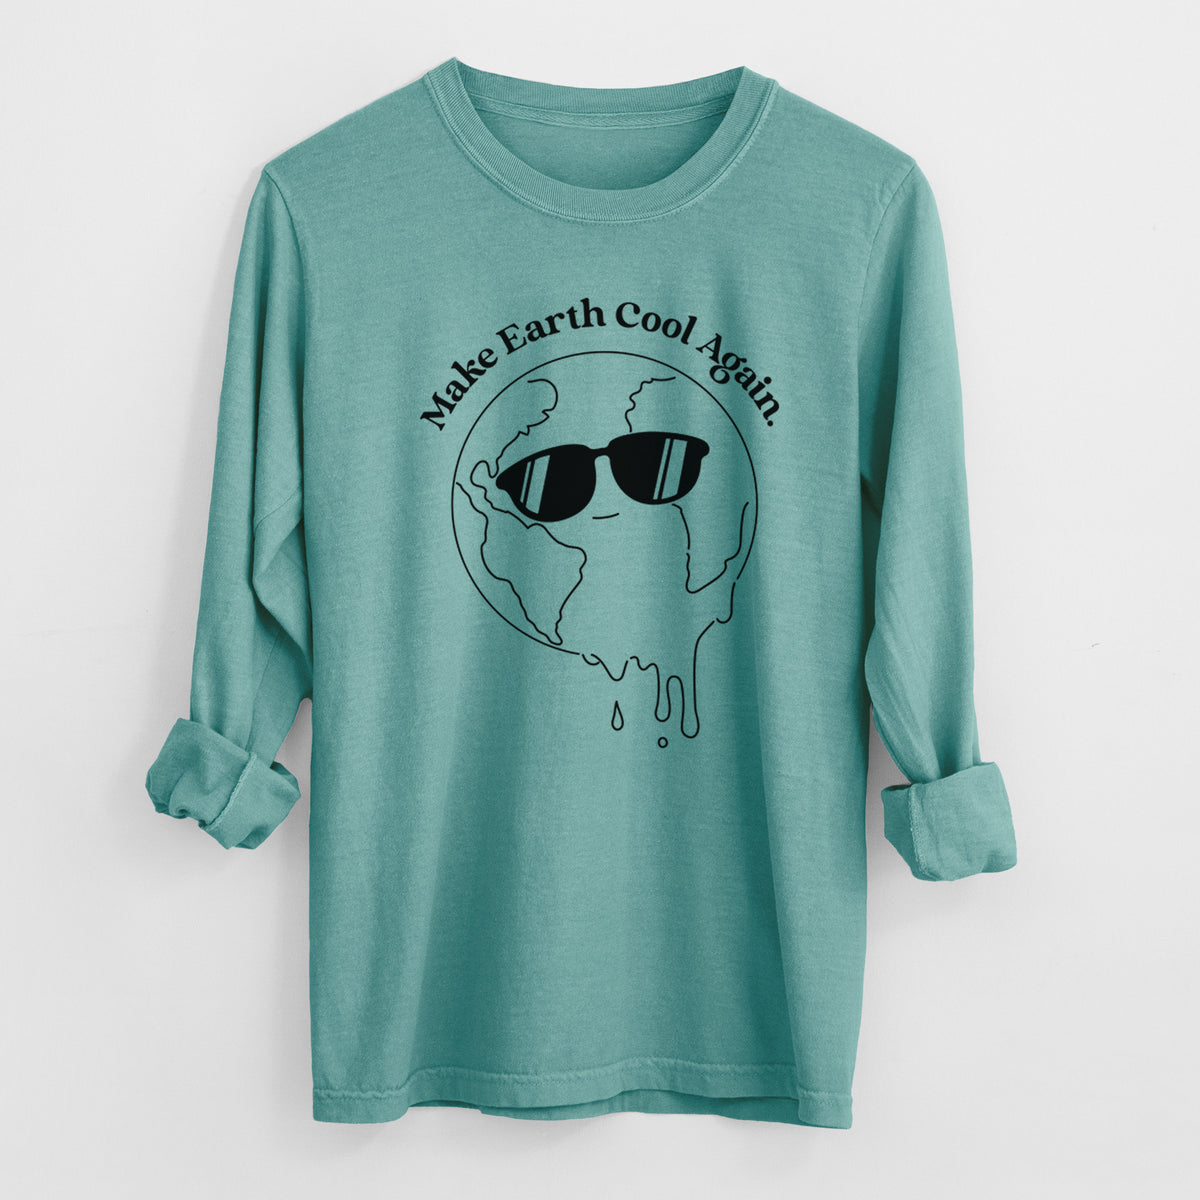 Make Earth Cool Again - Melted Planet - Heavyweight 100% Cotton Long Sleeve